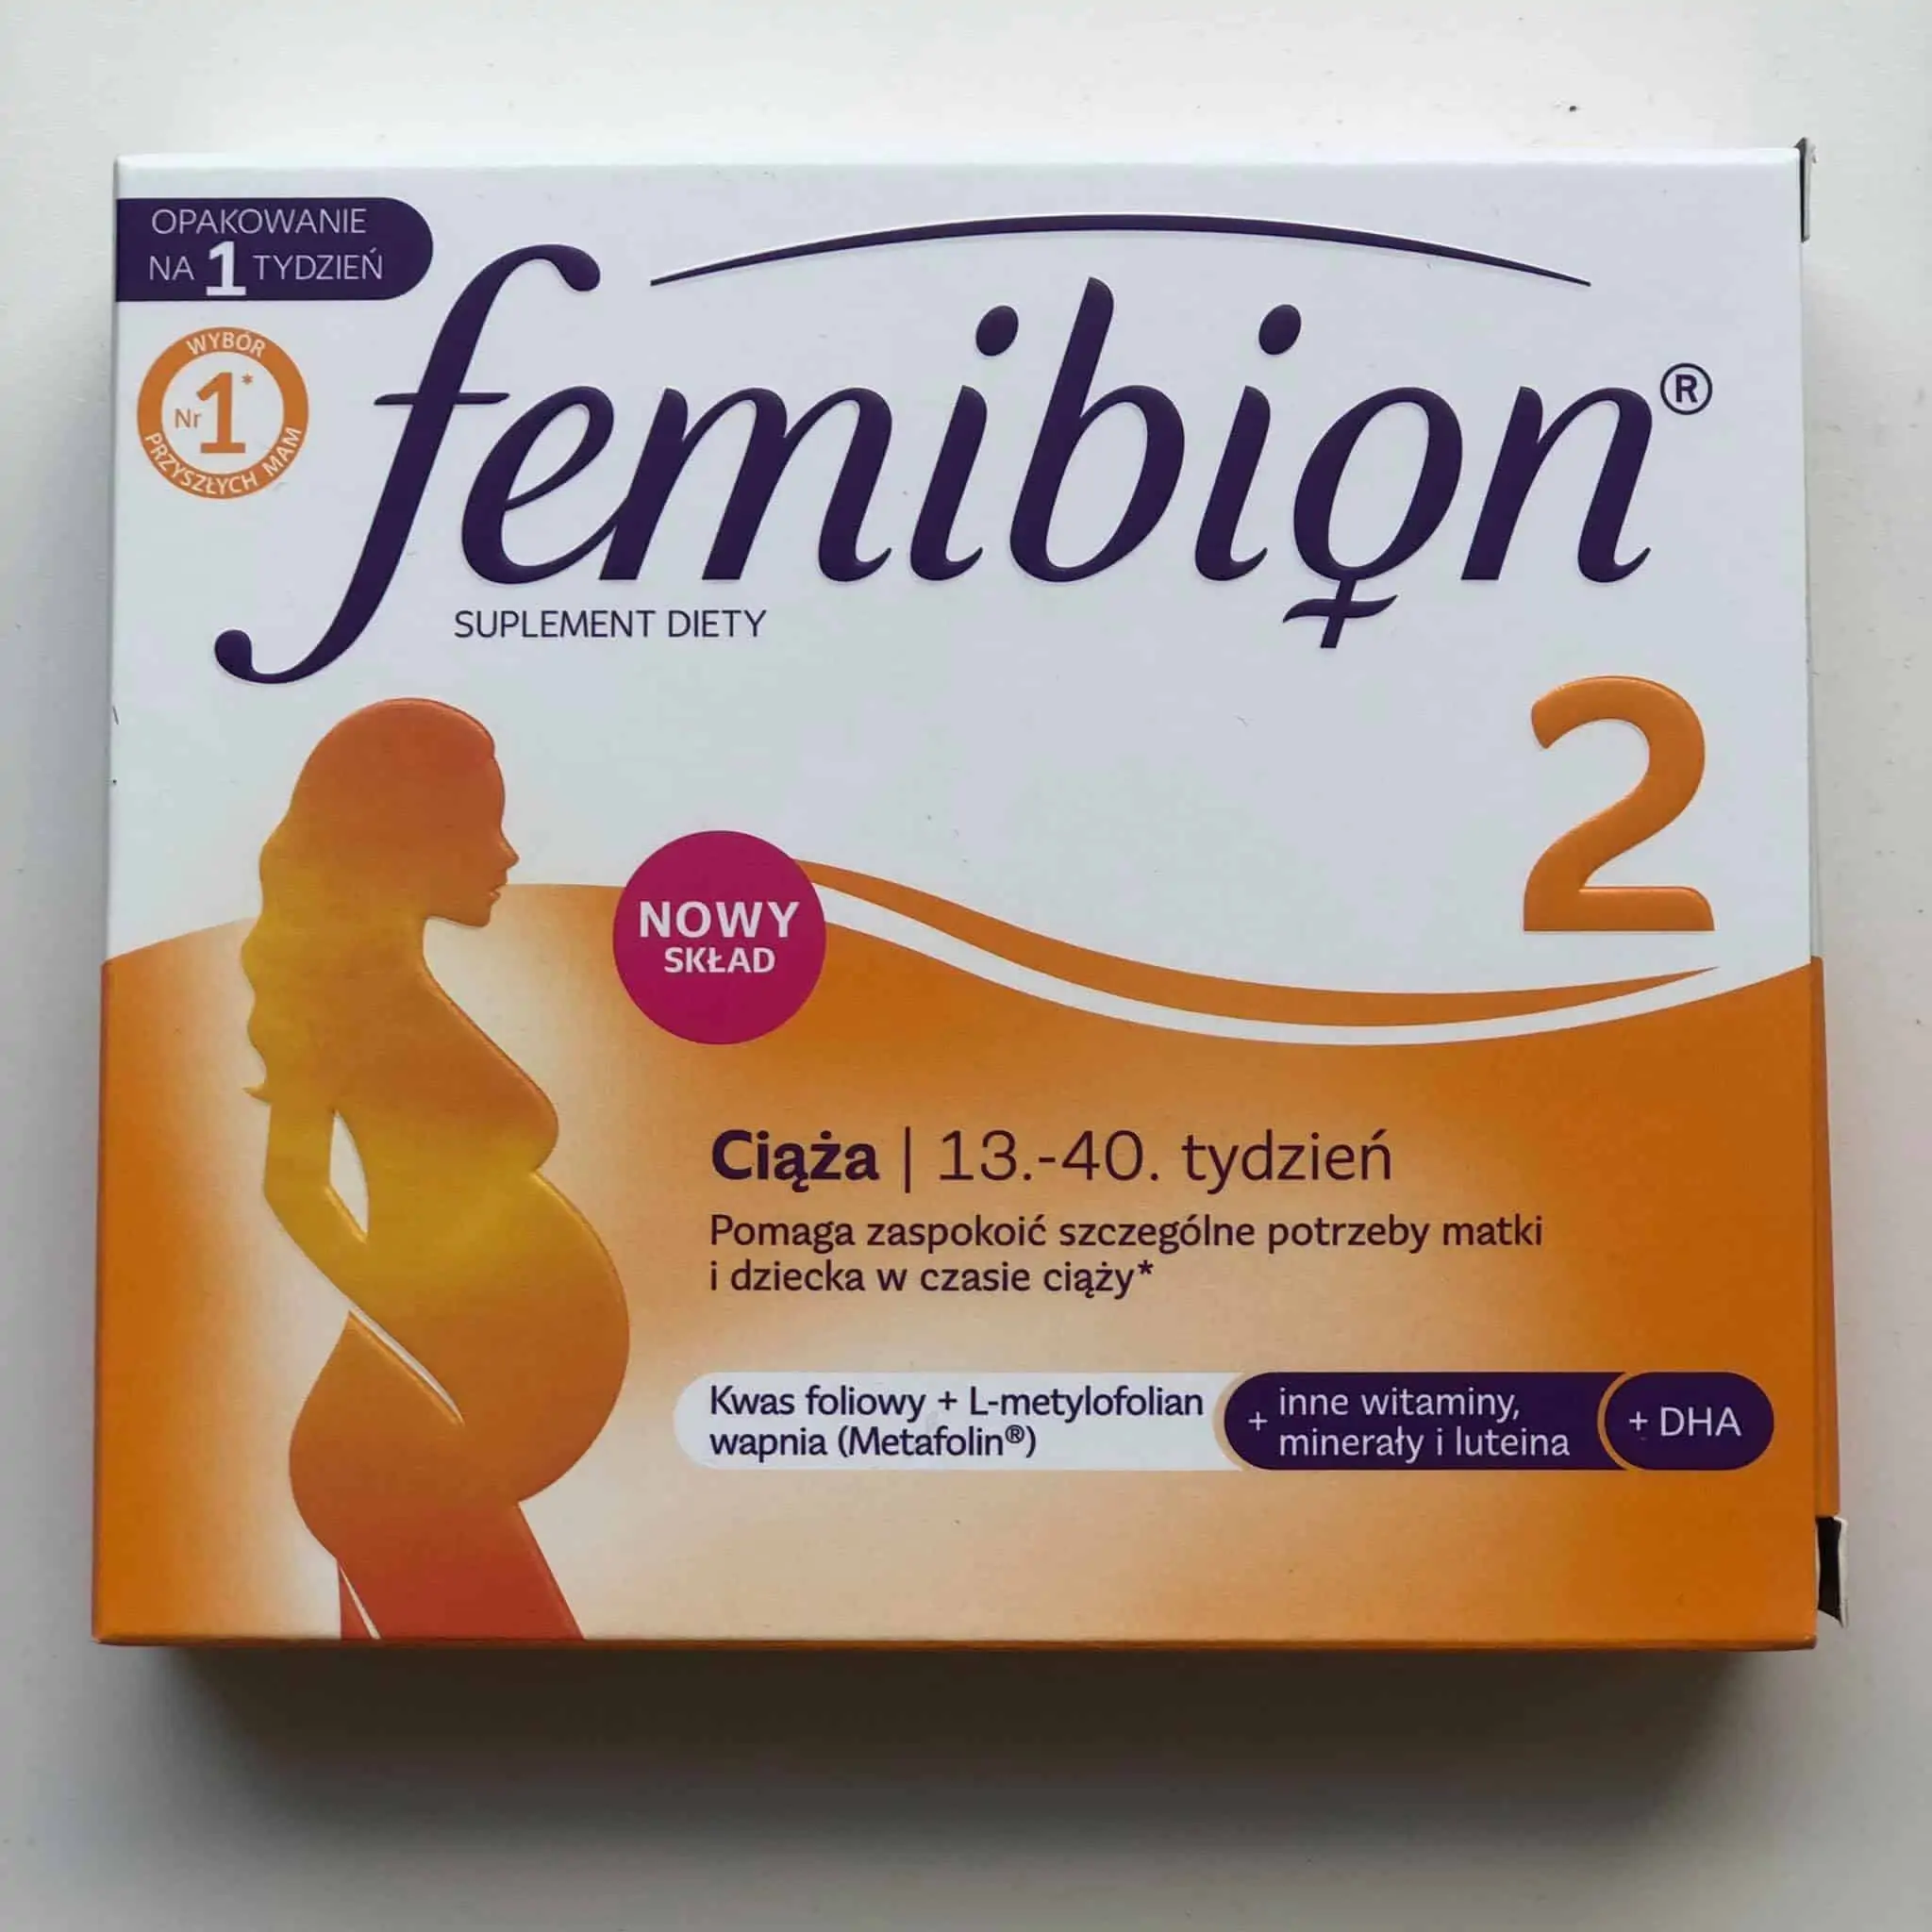 FEMIBION 1 TABLETS - Vitamins and minerals, omega 3